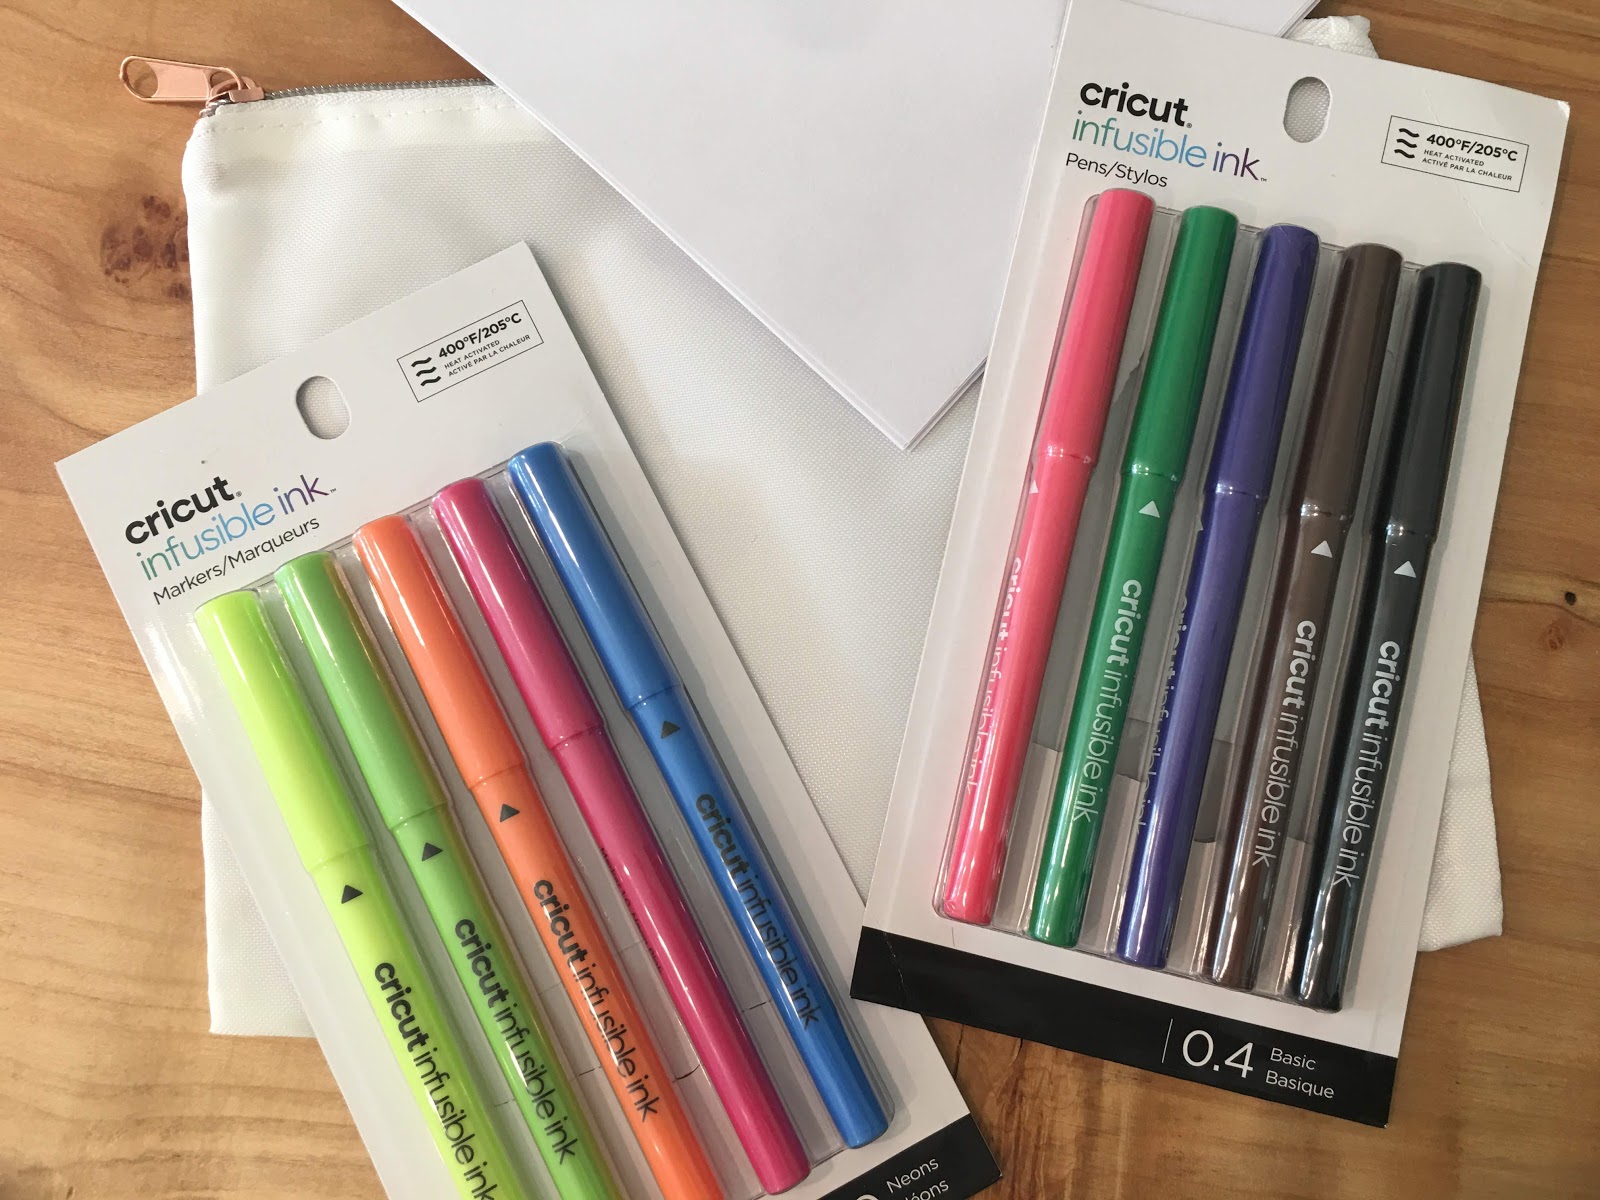 How to Use Cricut Infusible Ink Pens